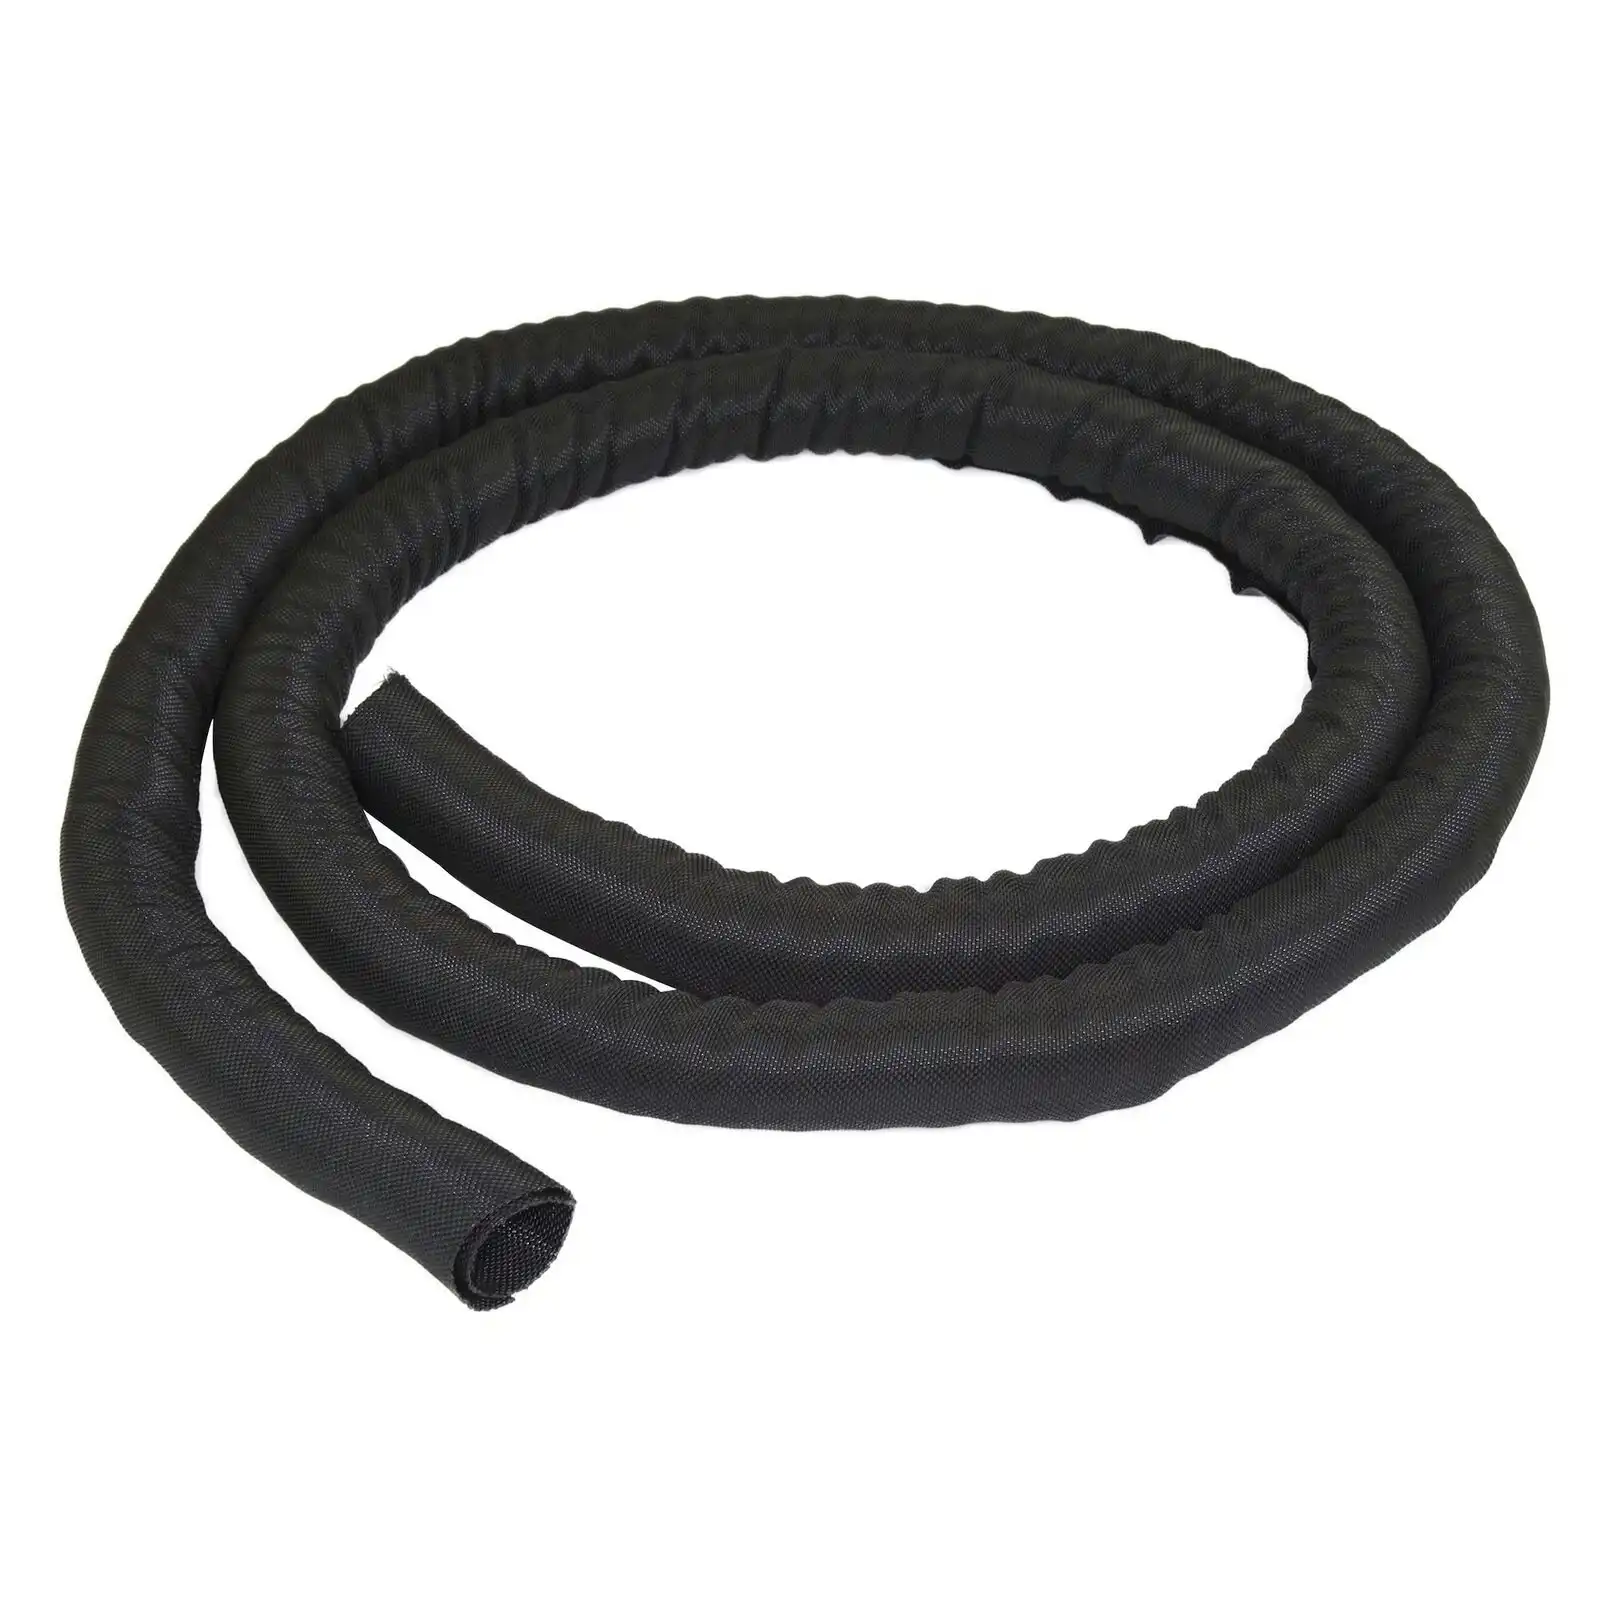 Star Tech 2m Flexible Coiled Polyster Cable Organiser/Protector/Manager Sleeve